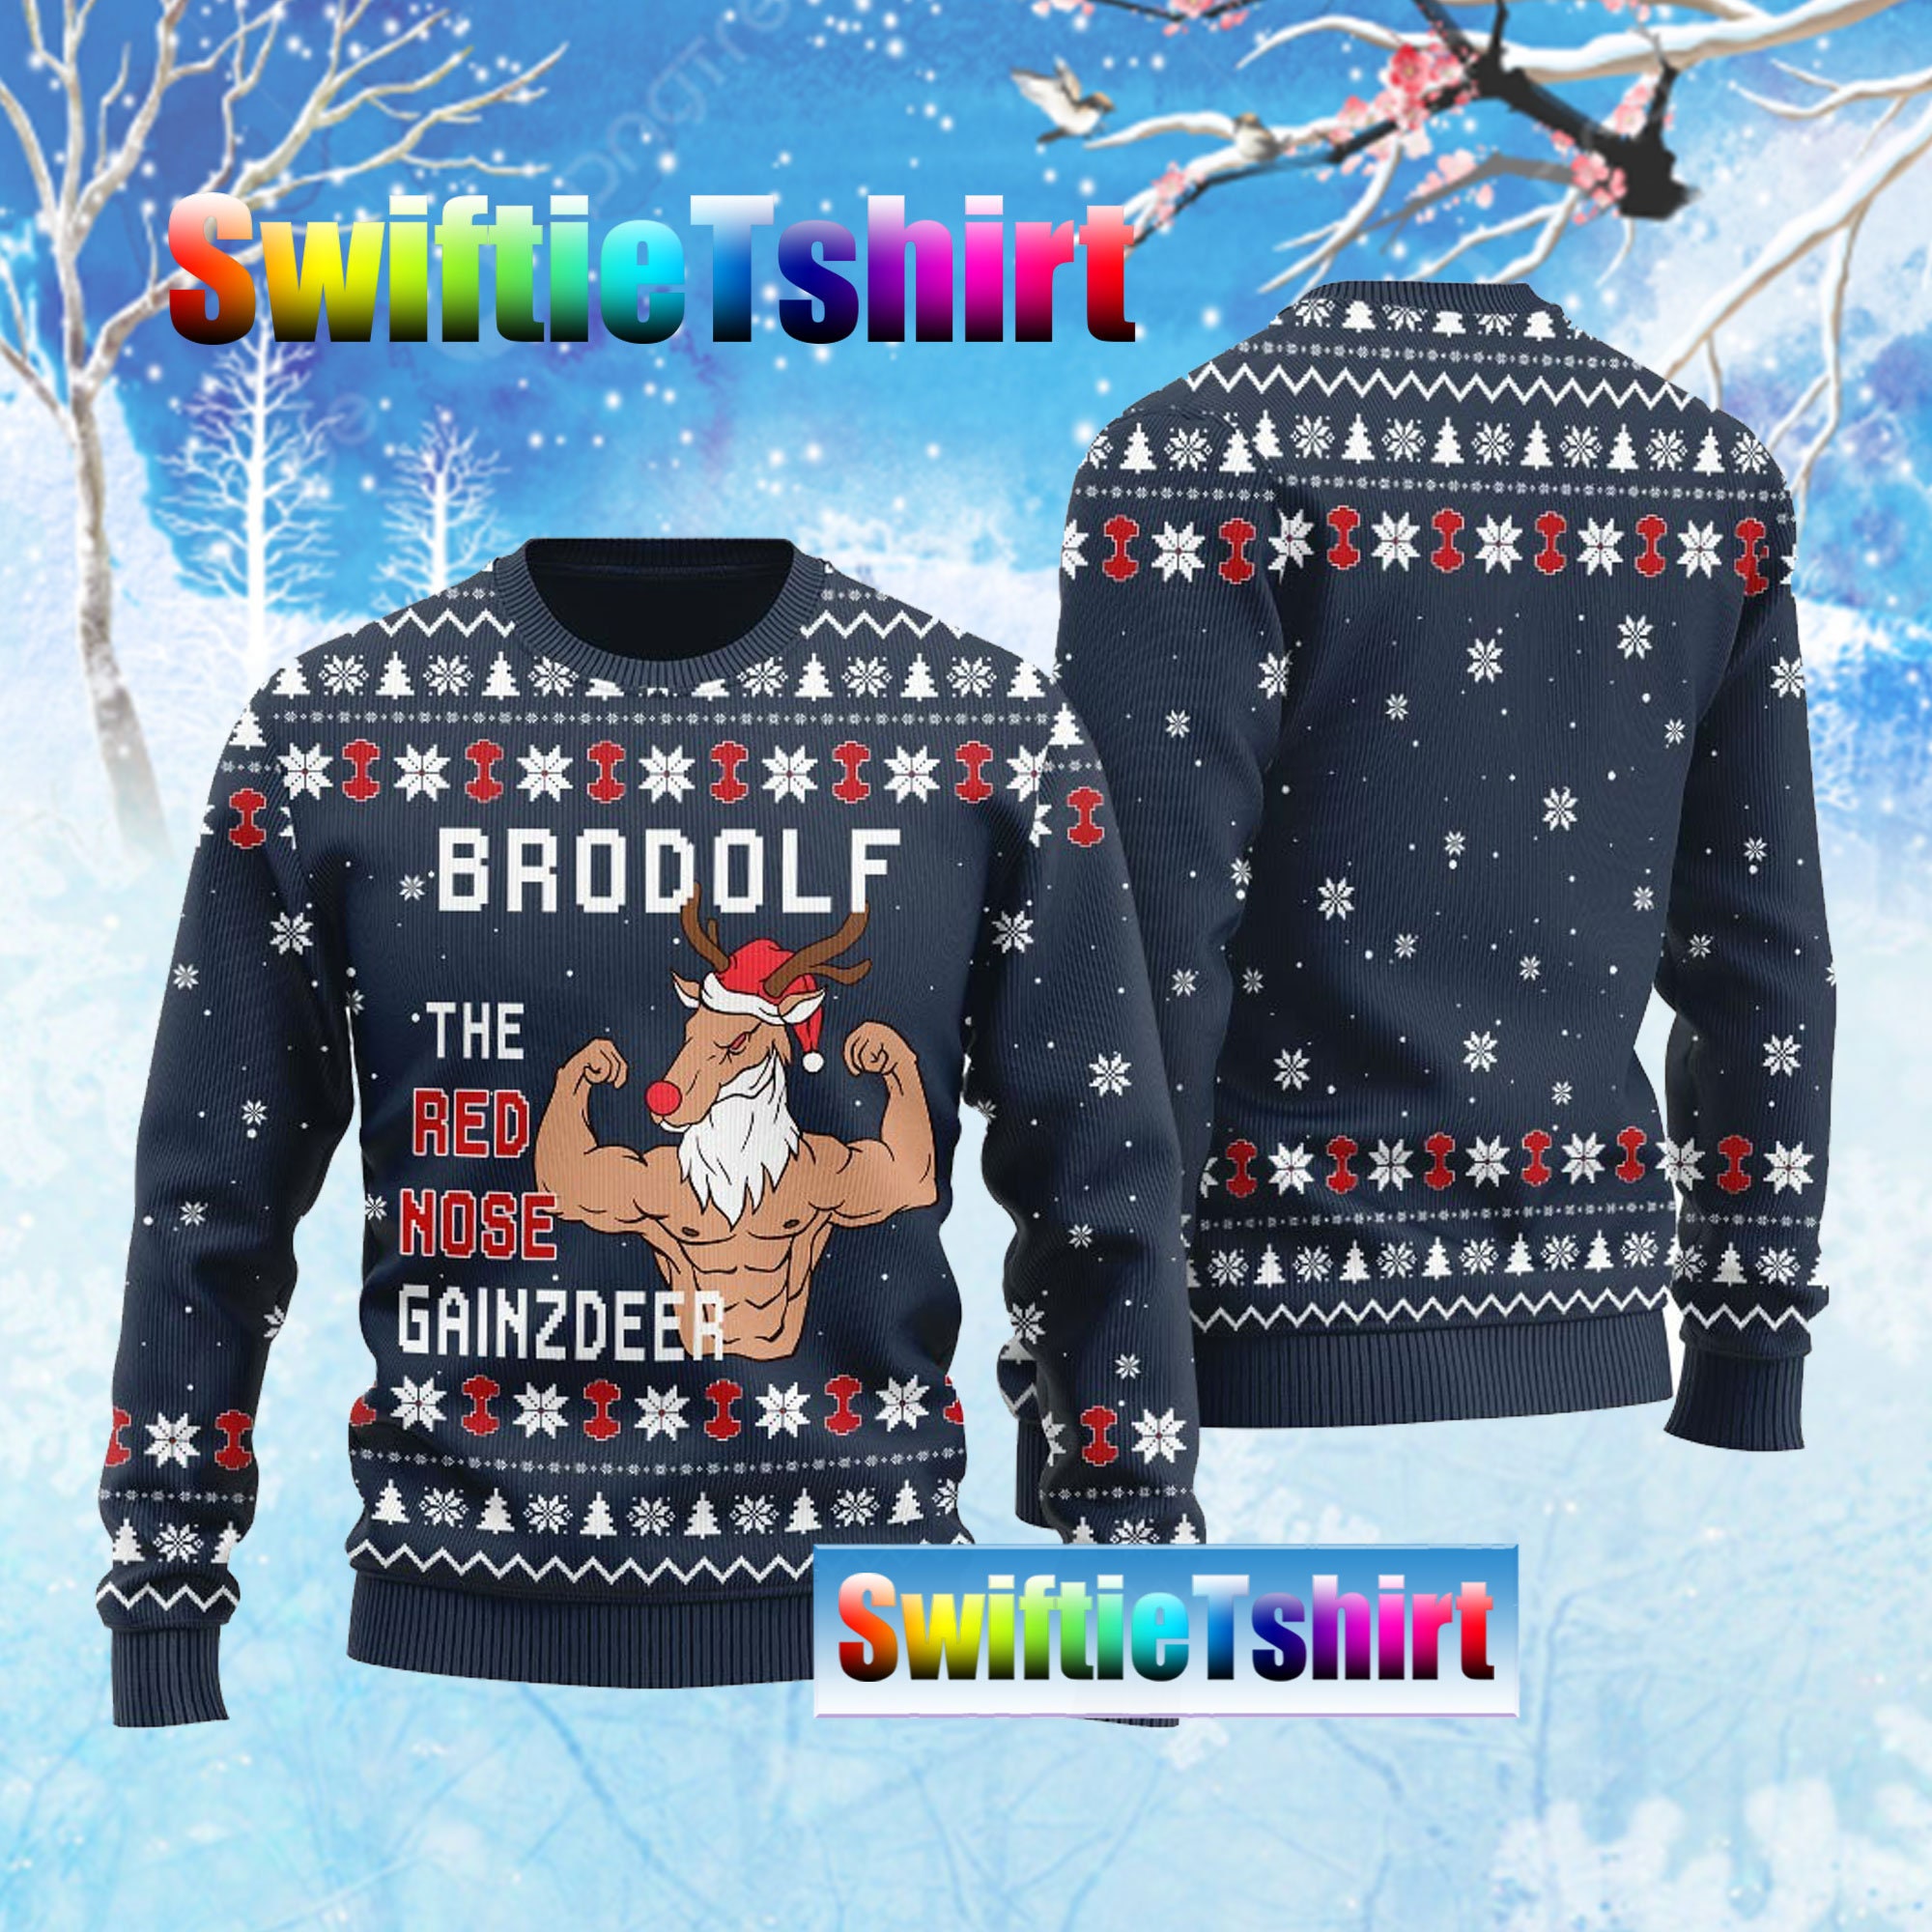 Discover Brodolf The Red Nose Gainzdeer Gym Ugly Christmas All Over Print Sweater Apparel